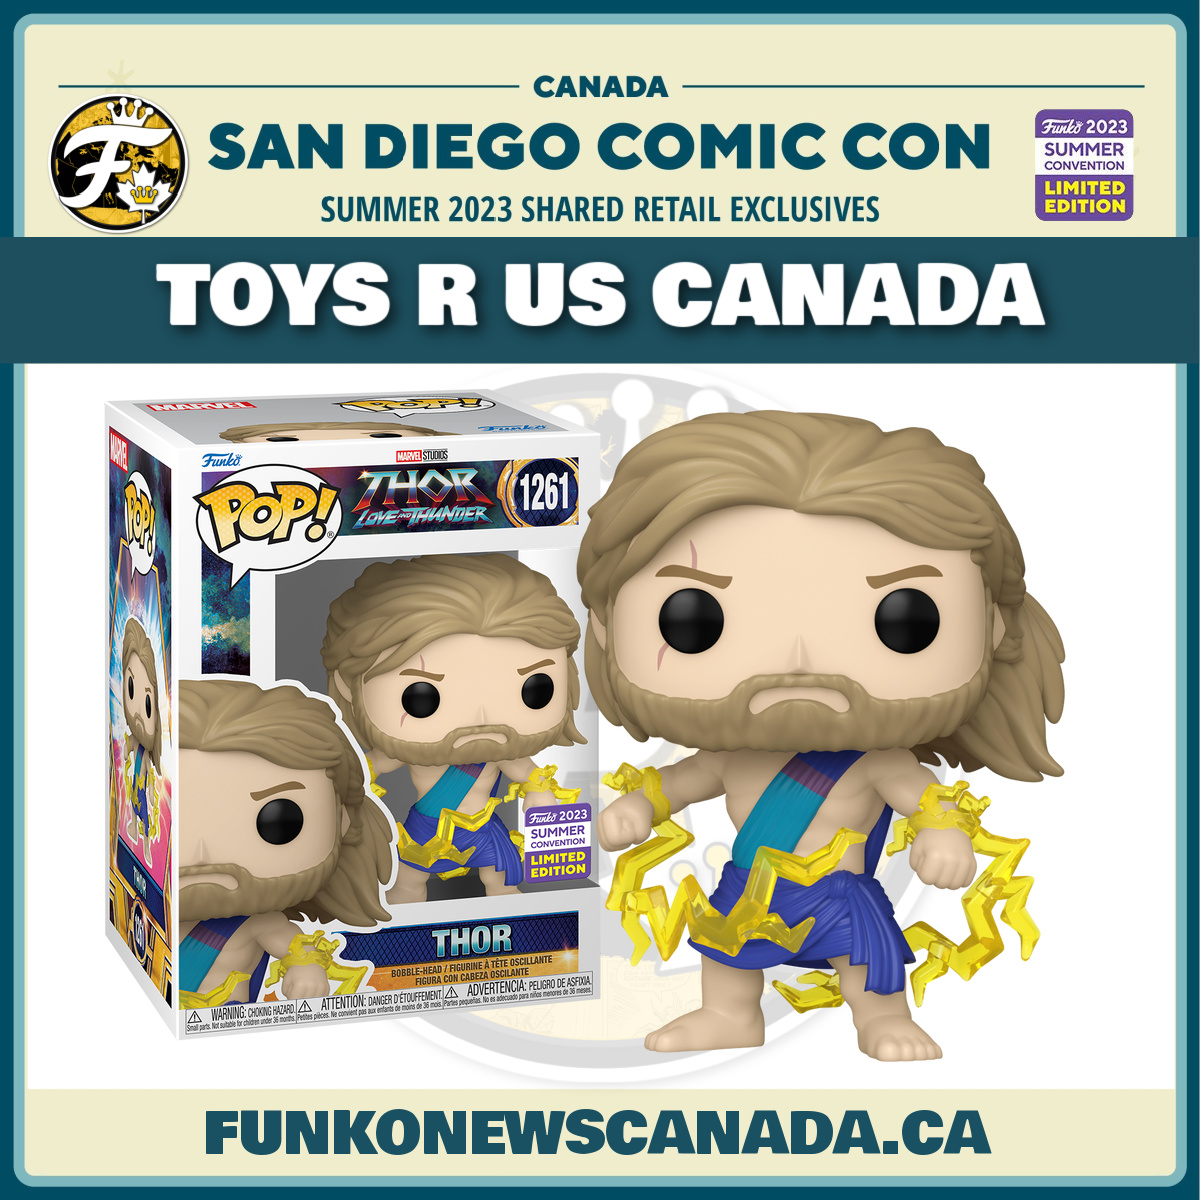 Landing Now In-Store at Toys R Us Canada

Funko Pop! Marvel: Thor Love and Thunder - Thor - 2023 Summer Convention Shared Exclusive

Note: Not all TRU locations will receive the same stock or at the same time. Check your local TRU for availability and selection.

Thanks to… https://t.co/sbOKXEG7OM https://t.co/zeST3afPre